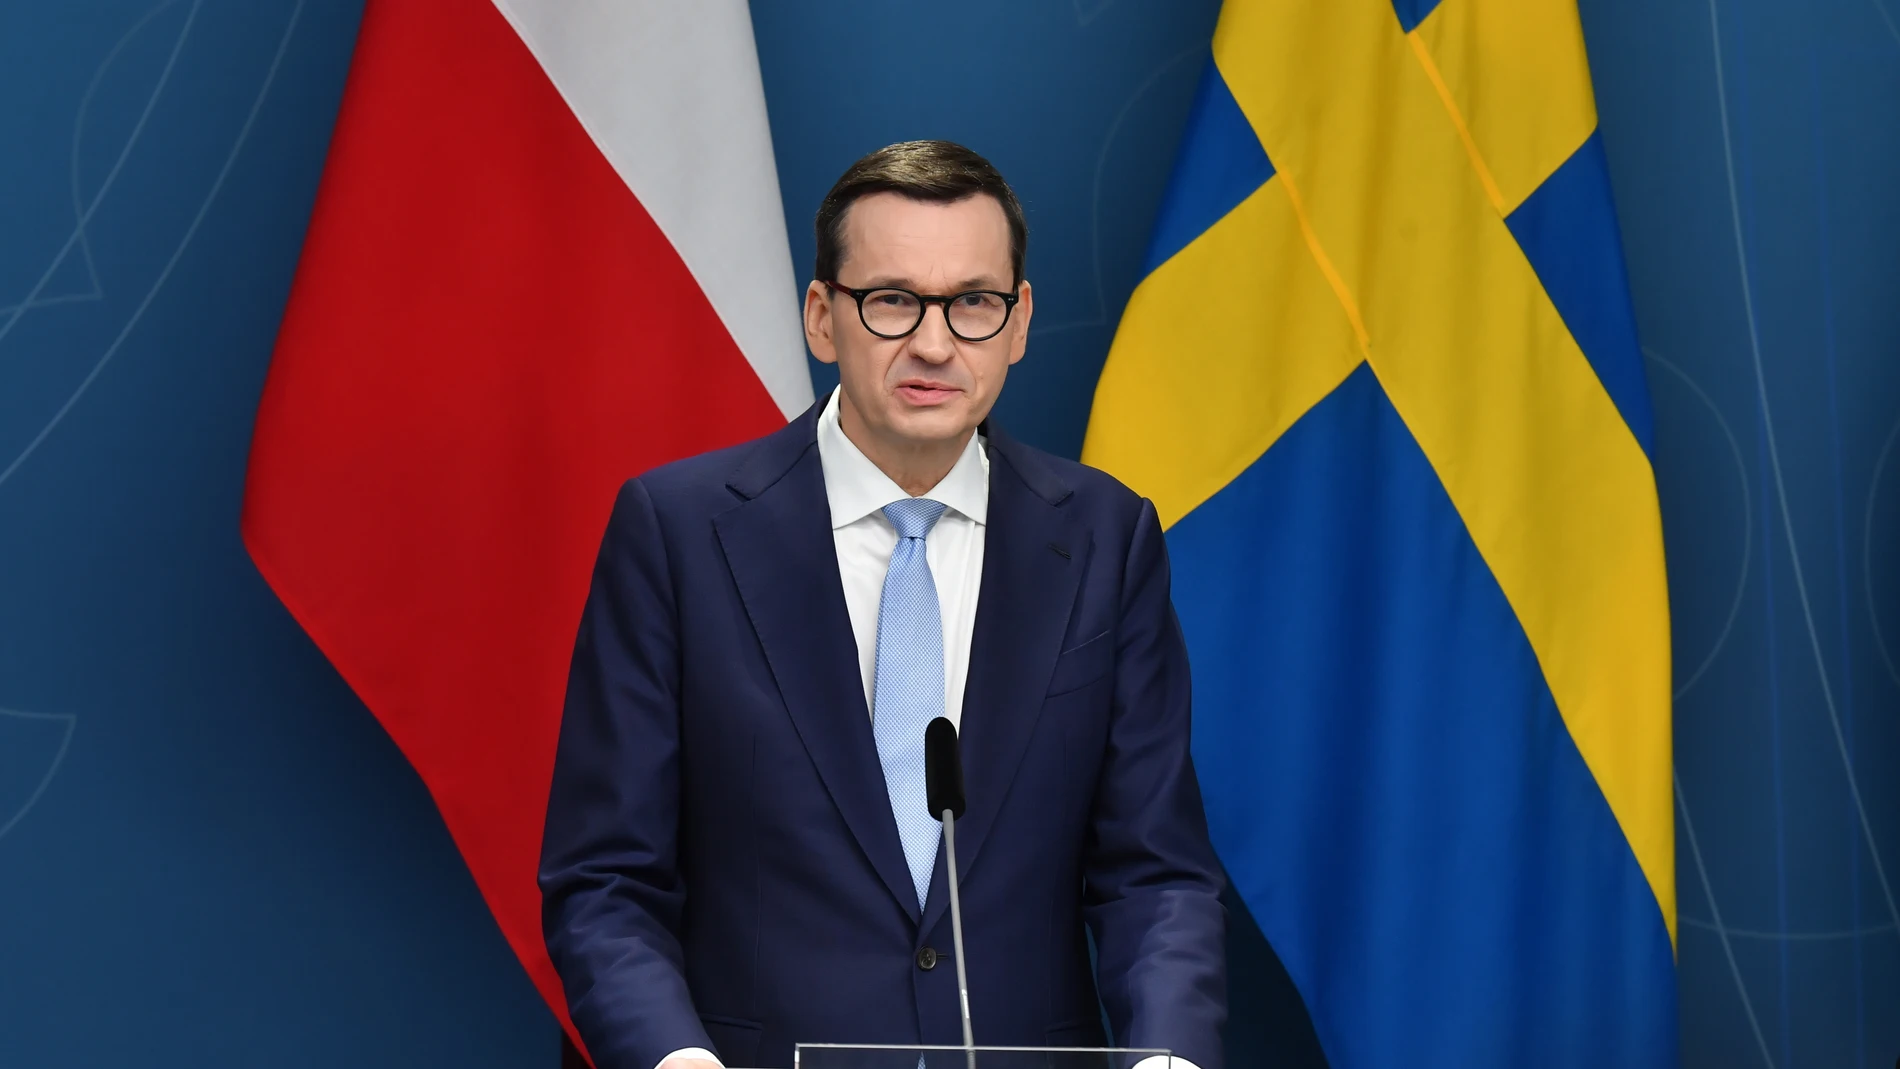 Stockholm (Sweden), 13/02/2023.- Polish Prime Minister Mateusz Morawiecki during a press conference with Swedish Prime Minister Ulf Kristersson after their meeting in Stockholm, Sweden, 13 February 2023. The meeting was focused on security policy and European support for Ukraine. (Polonia, Suecia, Ucrania, Estocolmo) EFE/EPA/ANDRZEJ LANGE POLAND OUT 